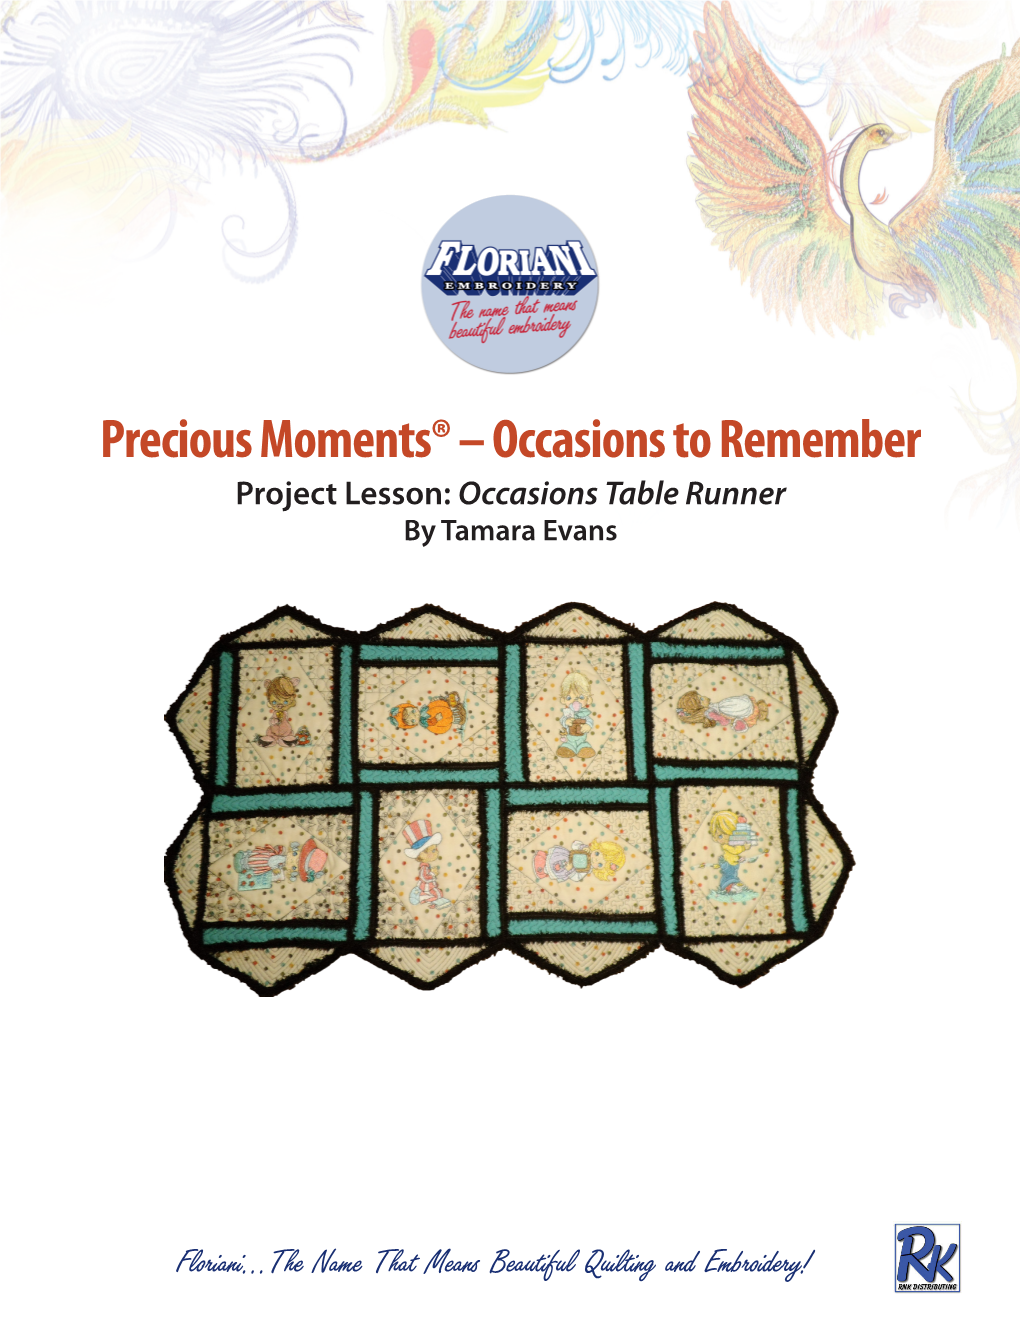 Precious Moments® – Occasions to Remember Project Lesson: Occasions Table Runner by Tamara Evans